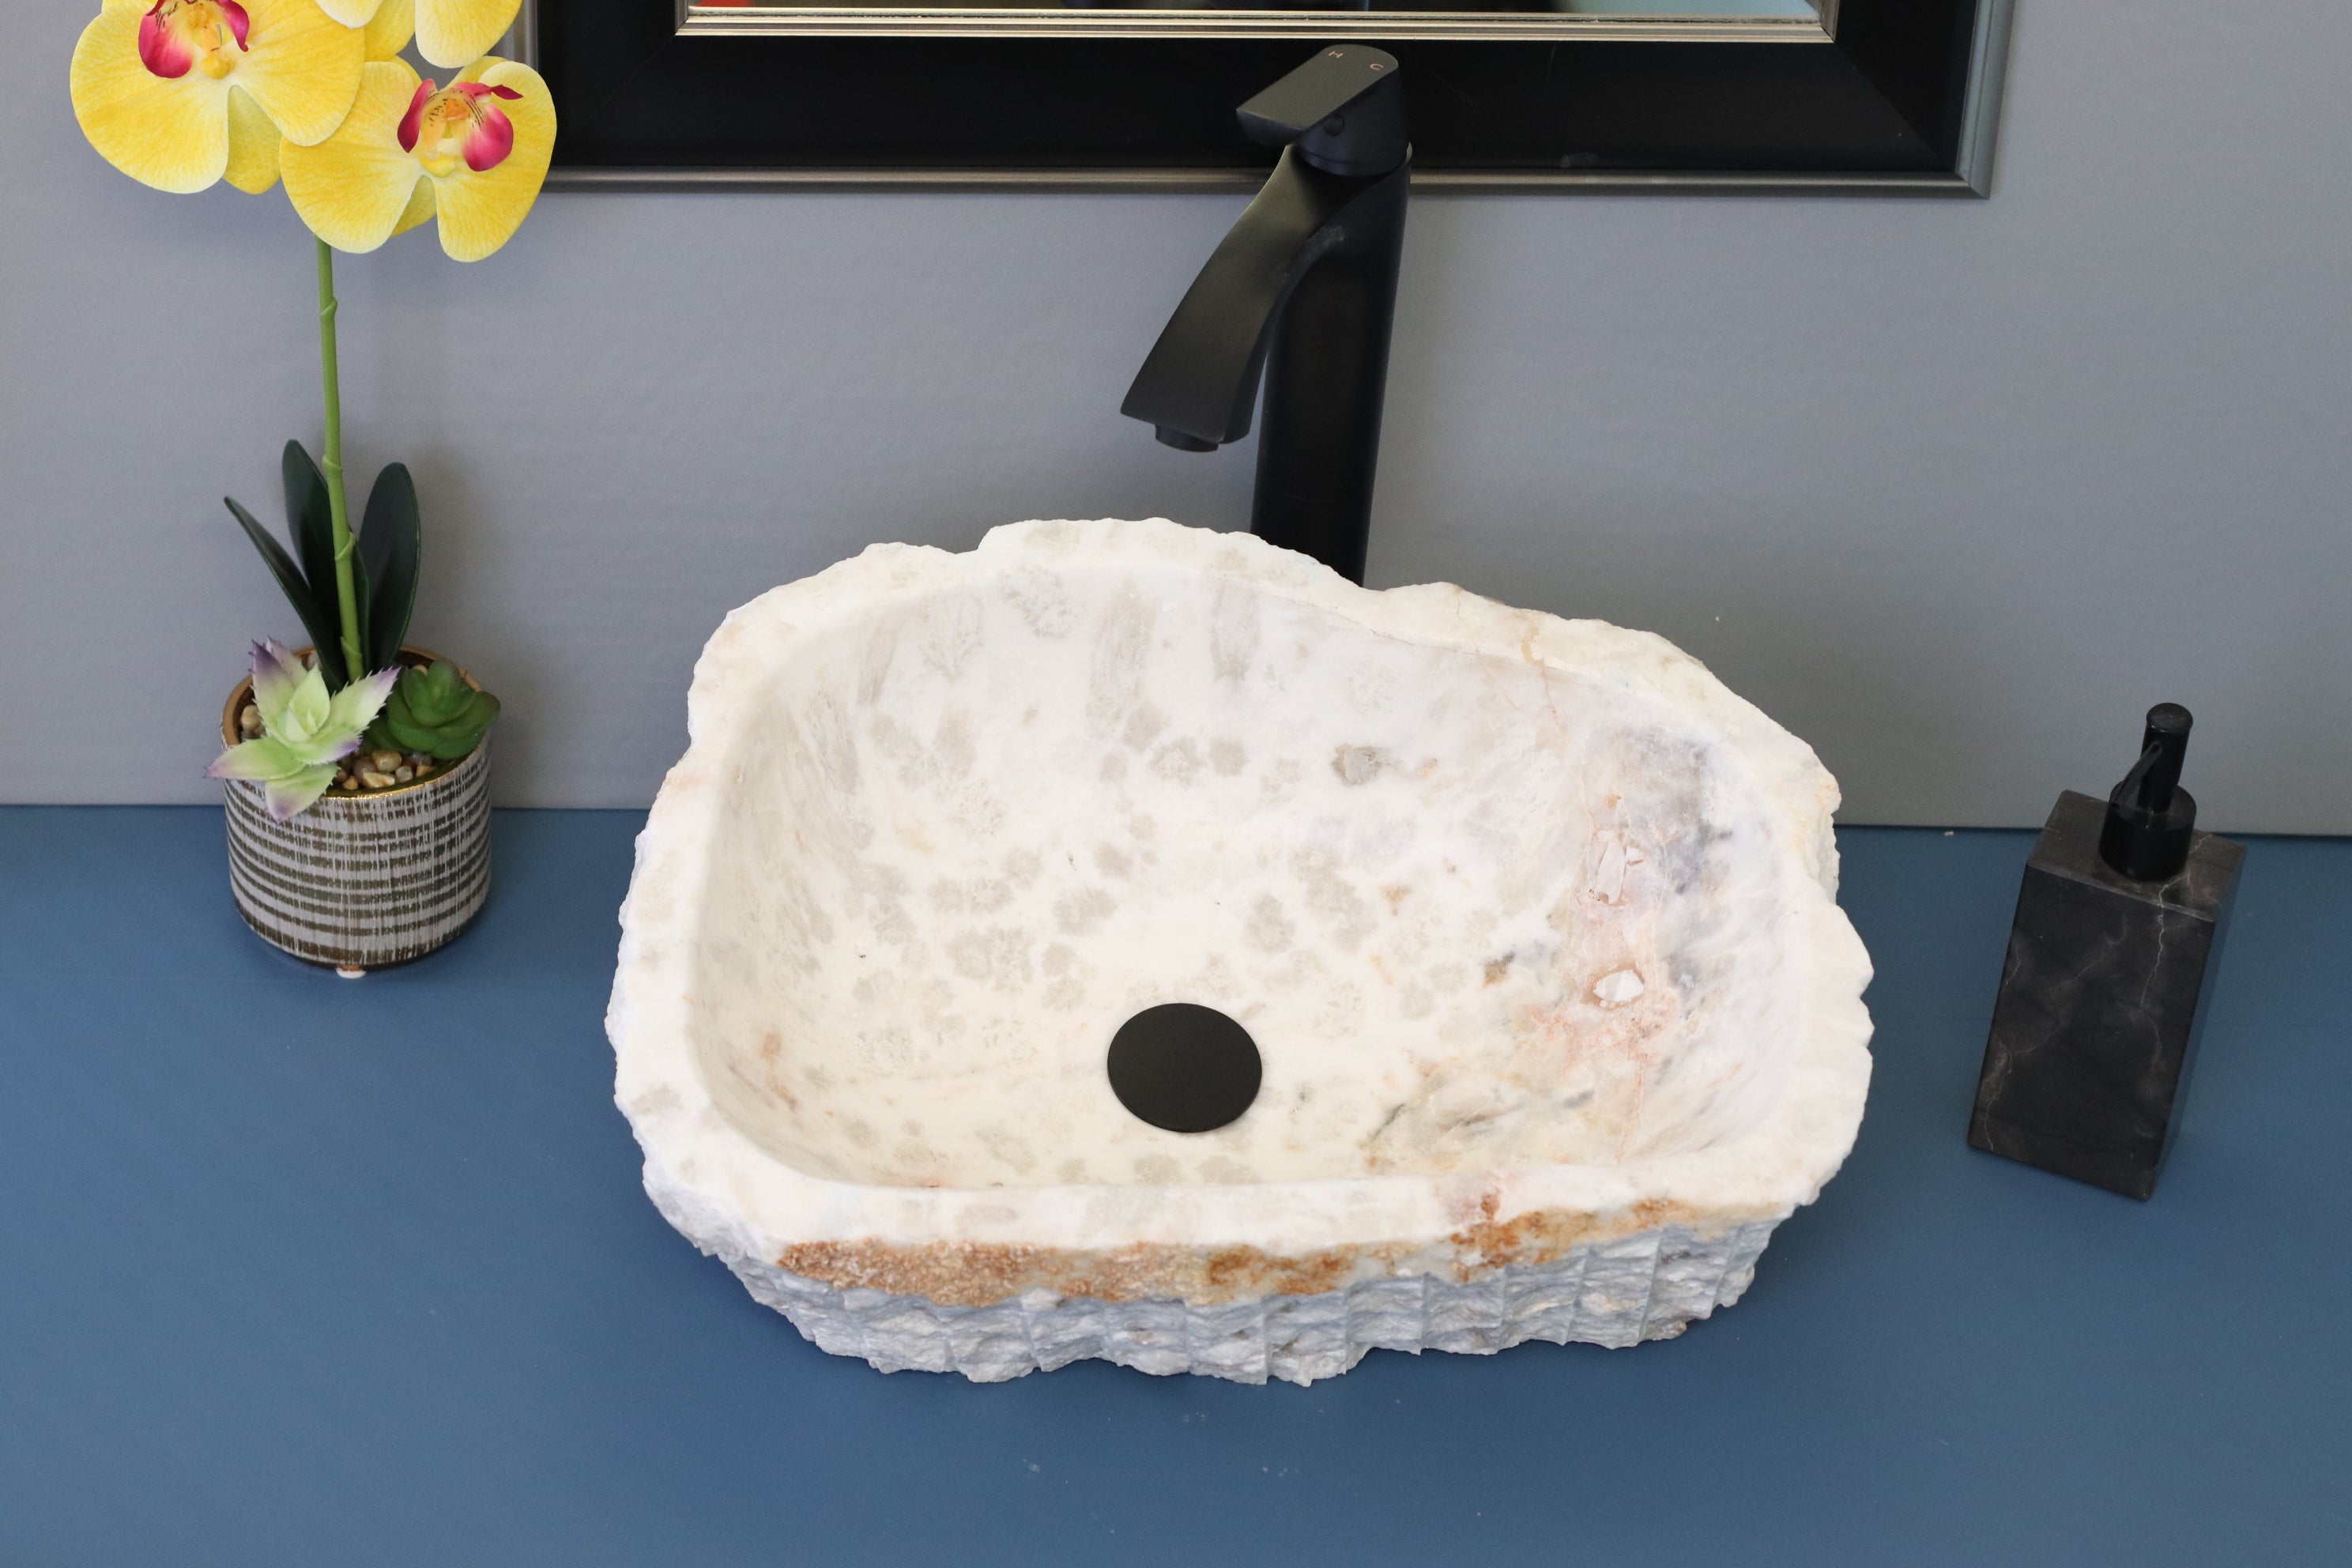 White Grey Onyx Stone  Bathroom Vessel Sink. Epoxy Sealant is available with fast shipping. Standard drain size. A beautiful work of rustic art. Handmade. Buy Now at www.felipandgrace.com.